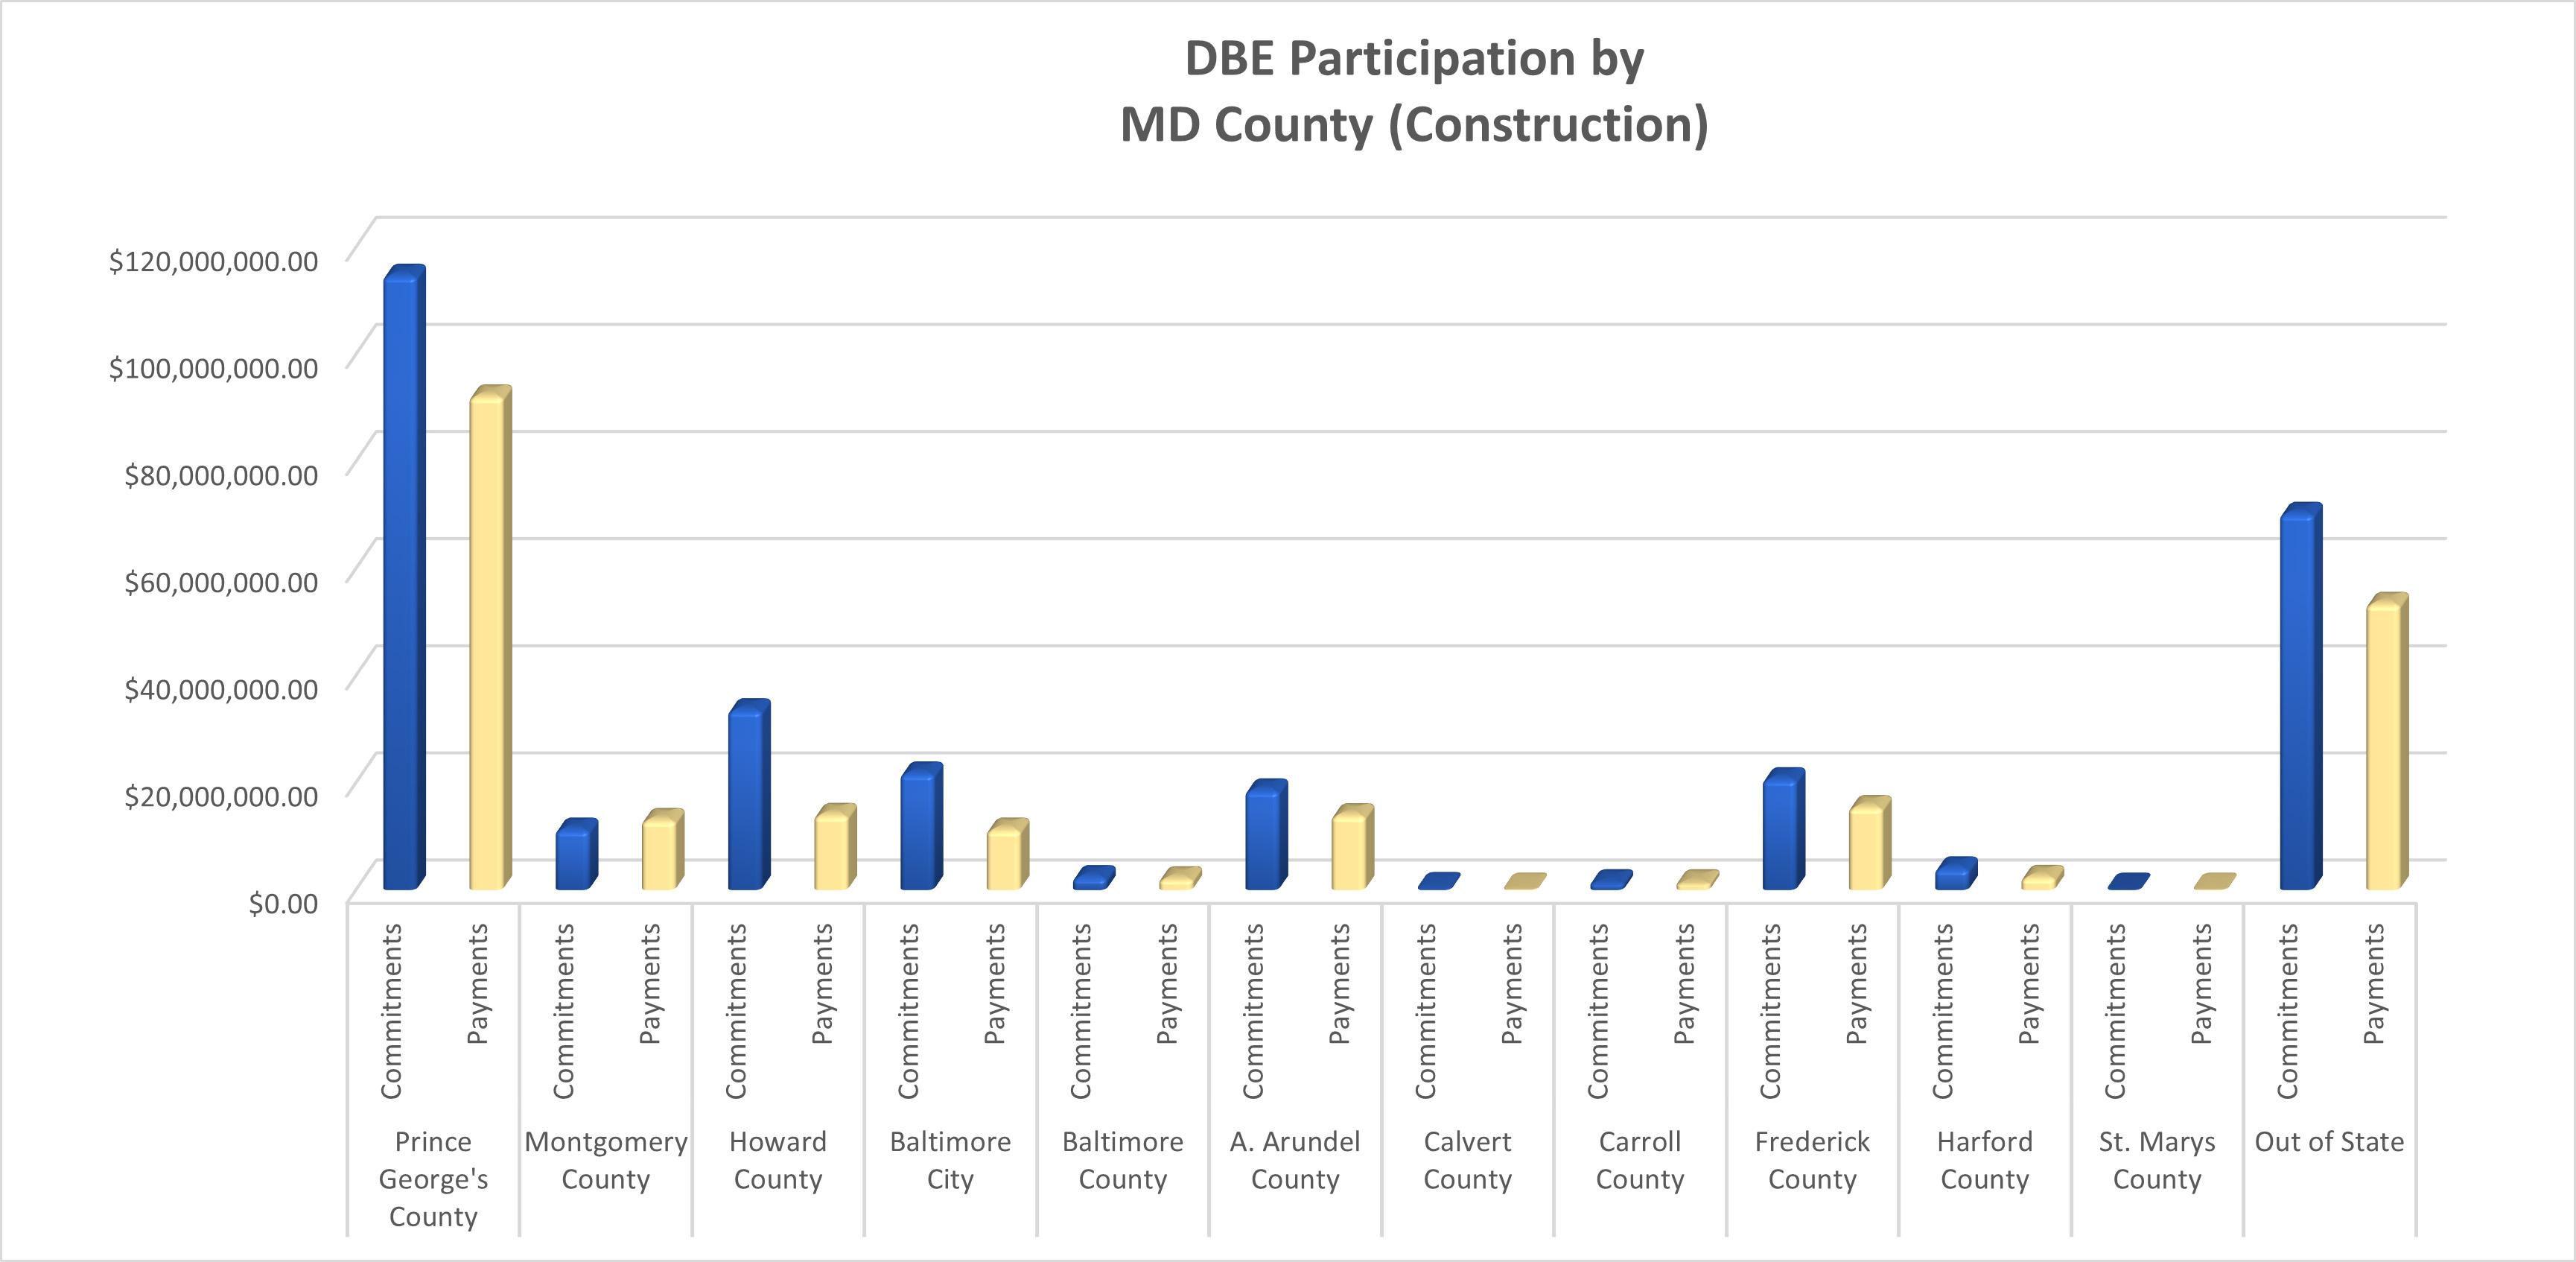 DBE Participation by MD County (Construction)